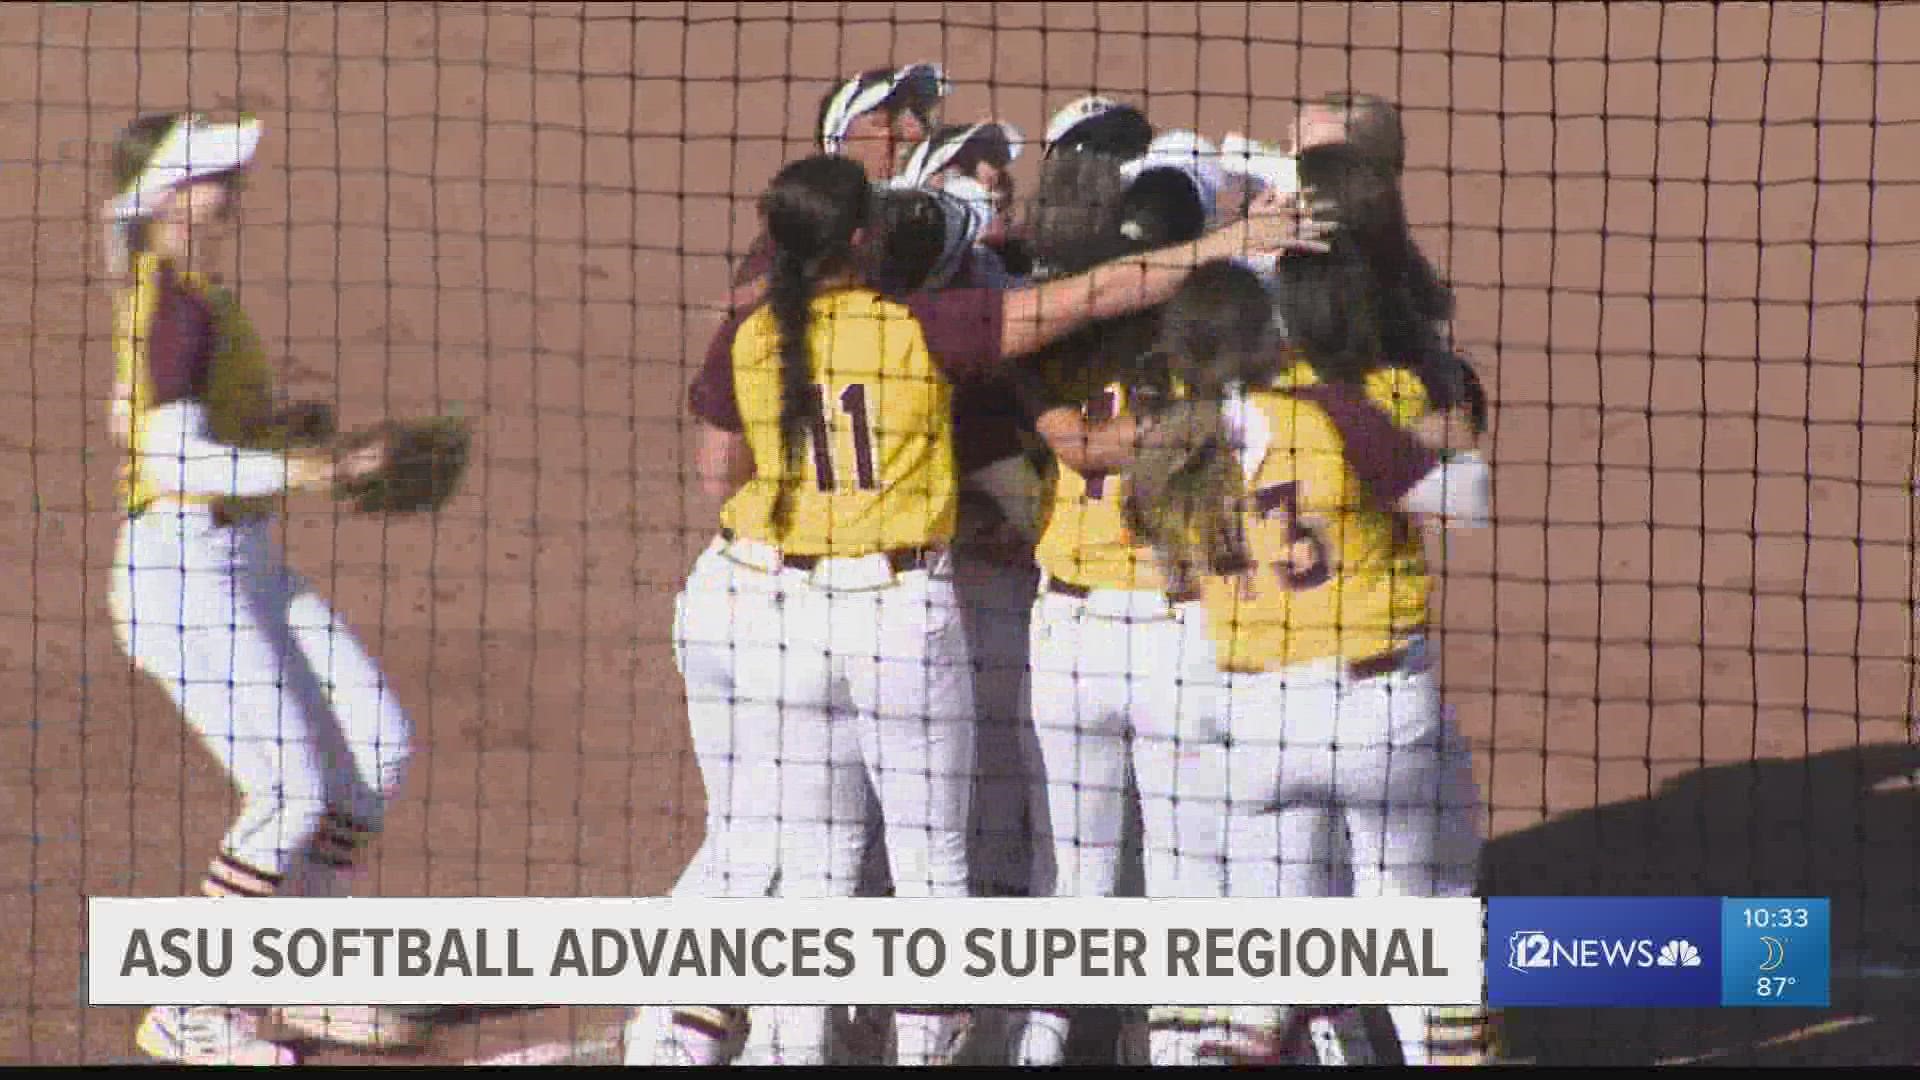 The Sun Devils dispatched of SDSU to advance one step closer to the College World Series.